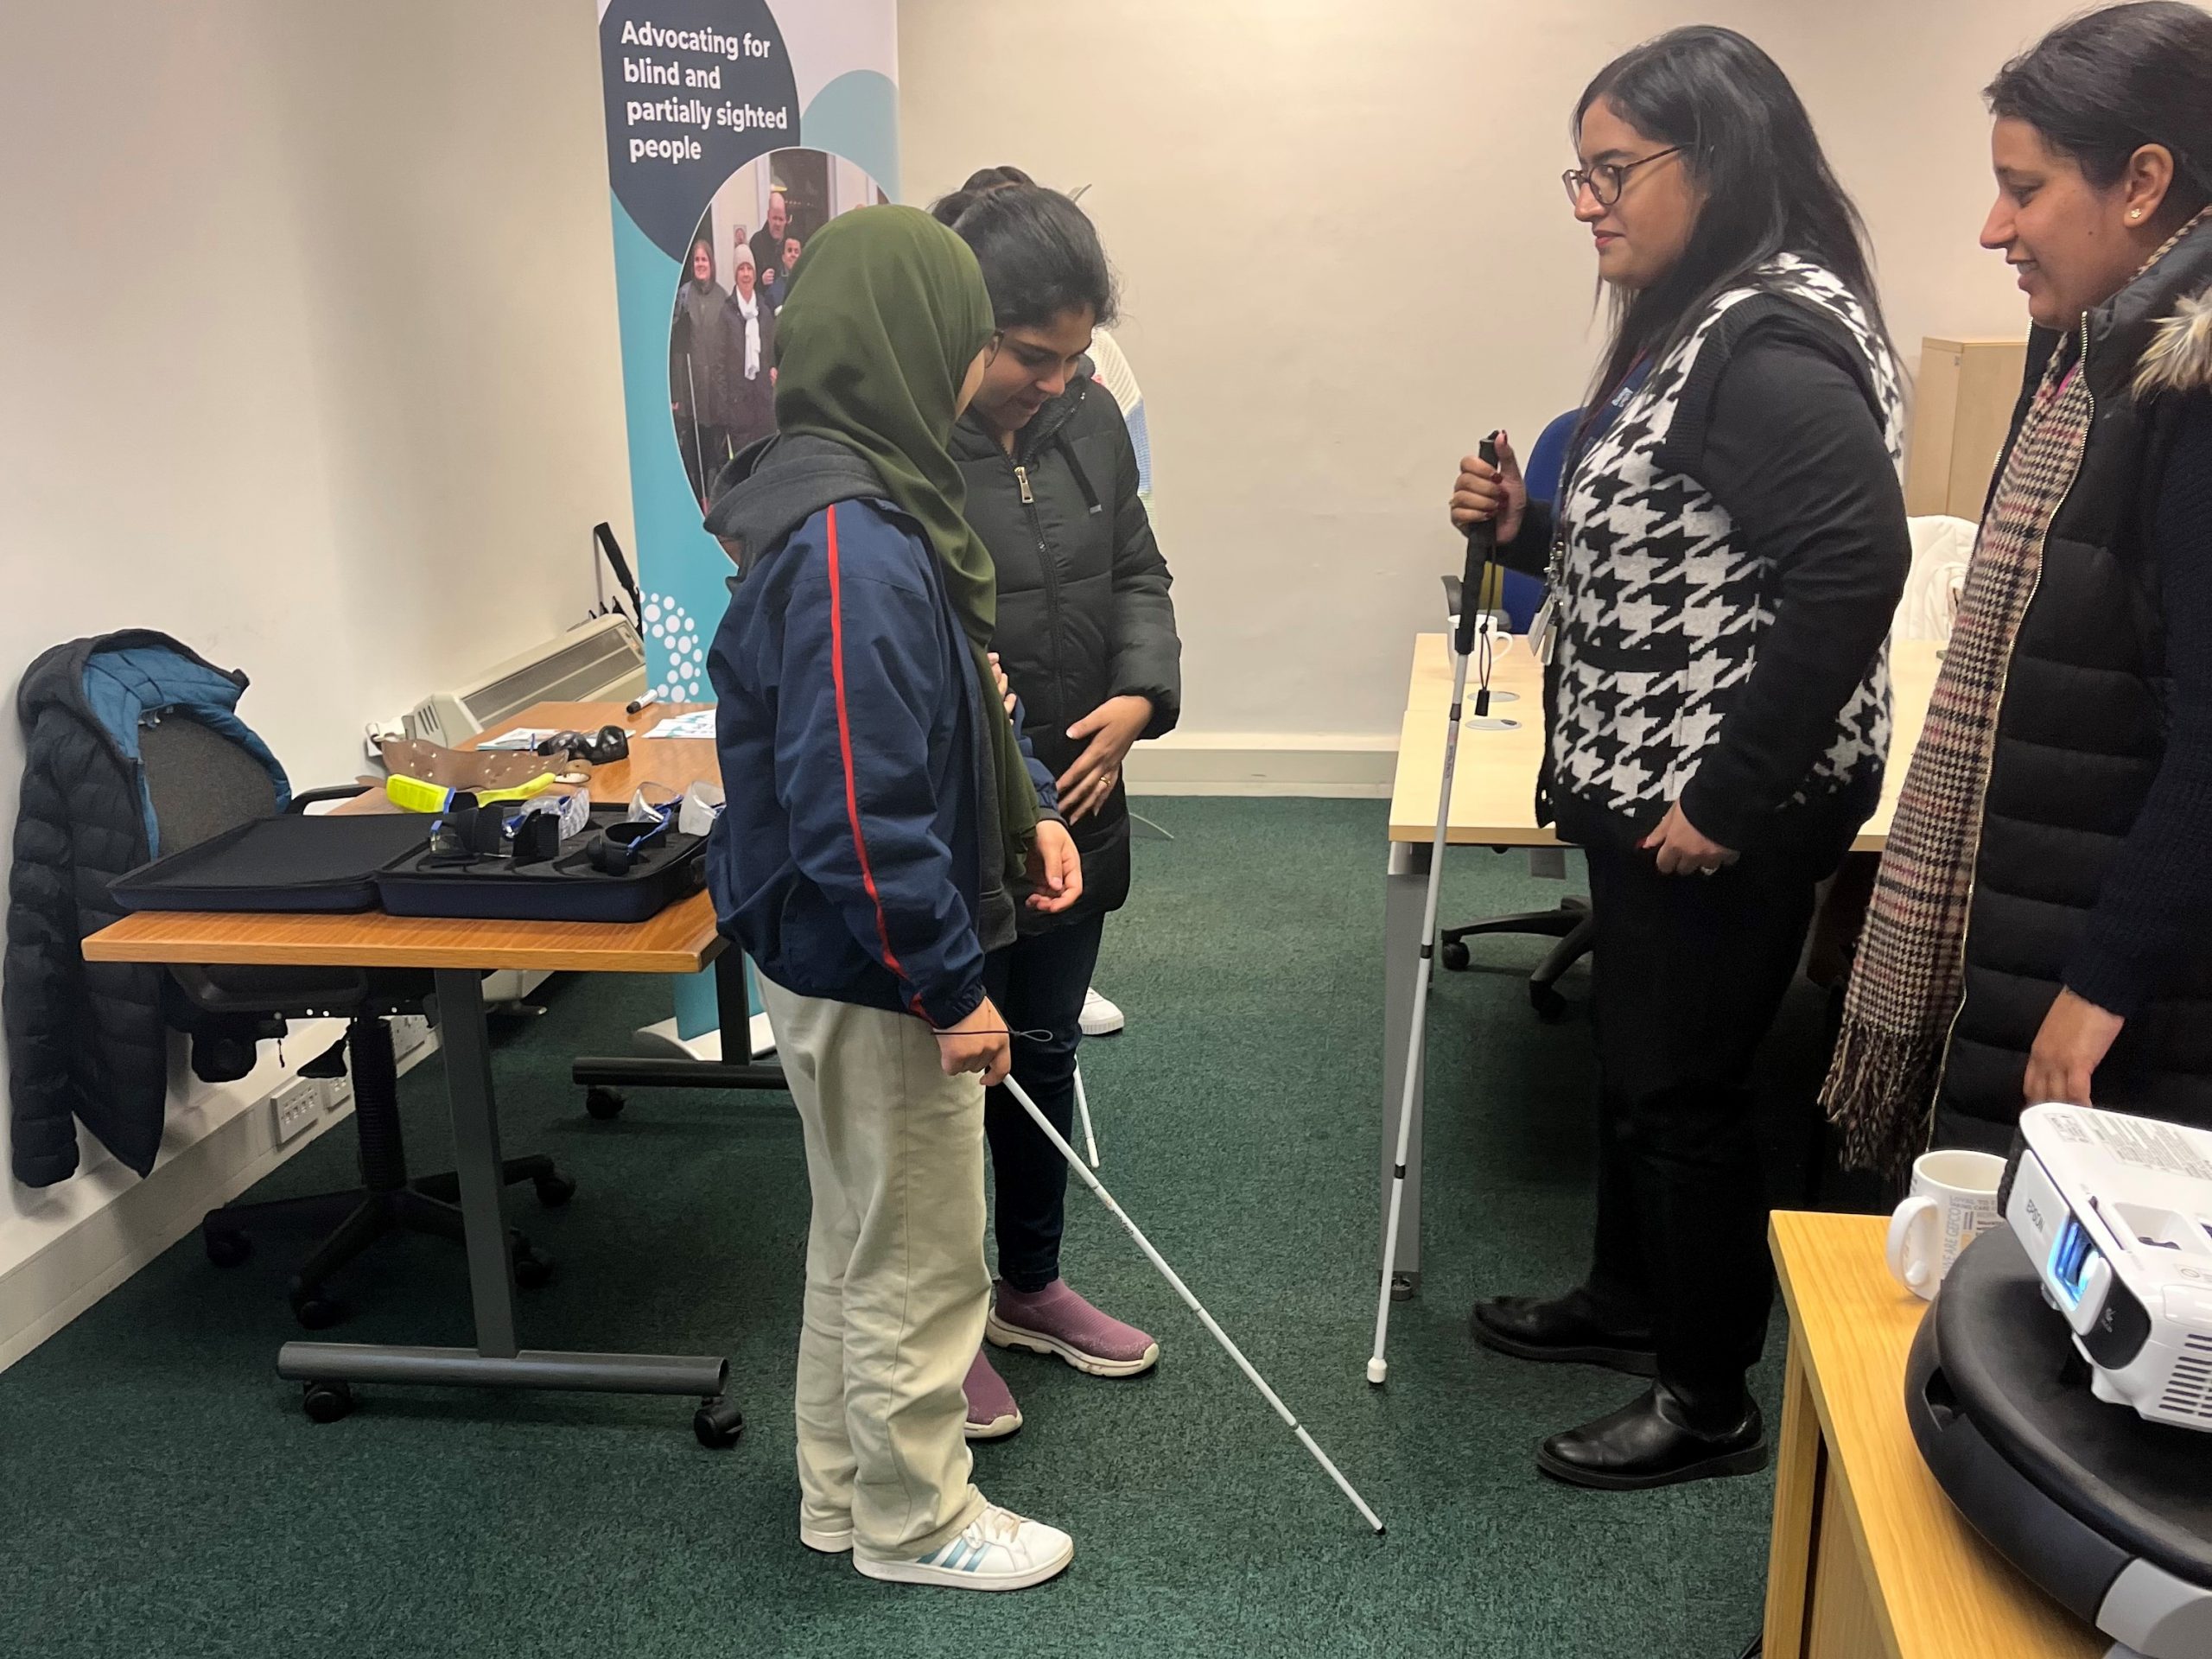 Two pairs of Ethos Farm Staff taking part in the sighted guide training. One person from each pair is holding a white cane, and being guided by the other.